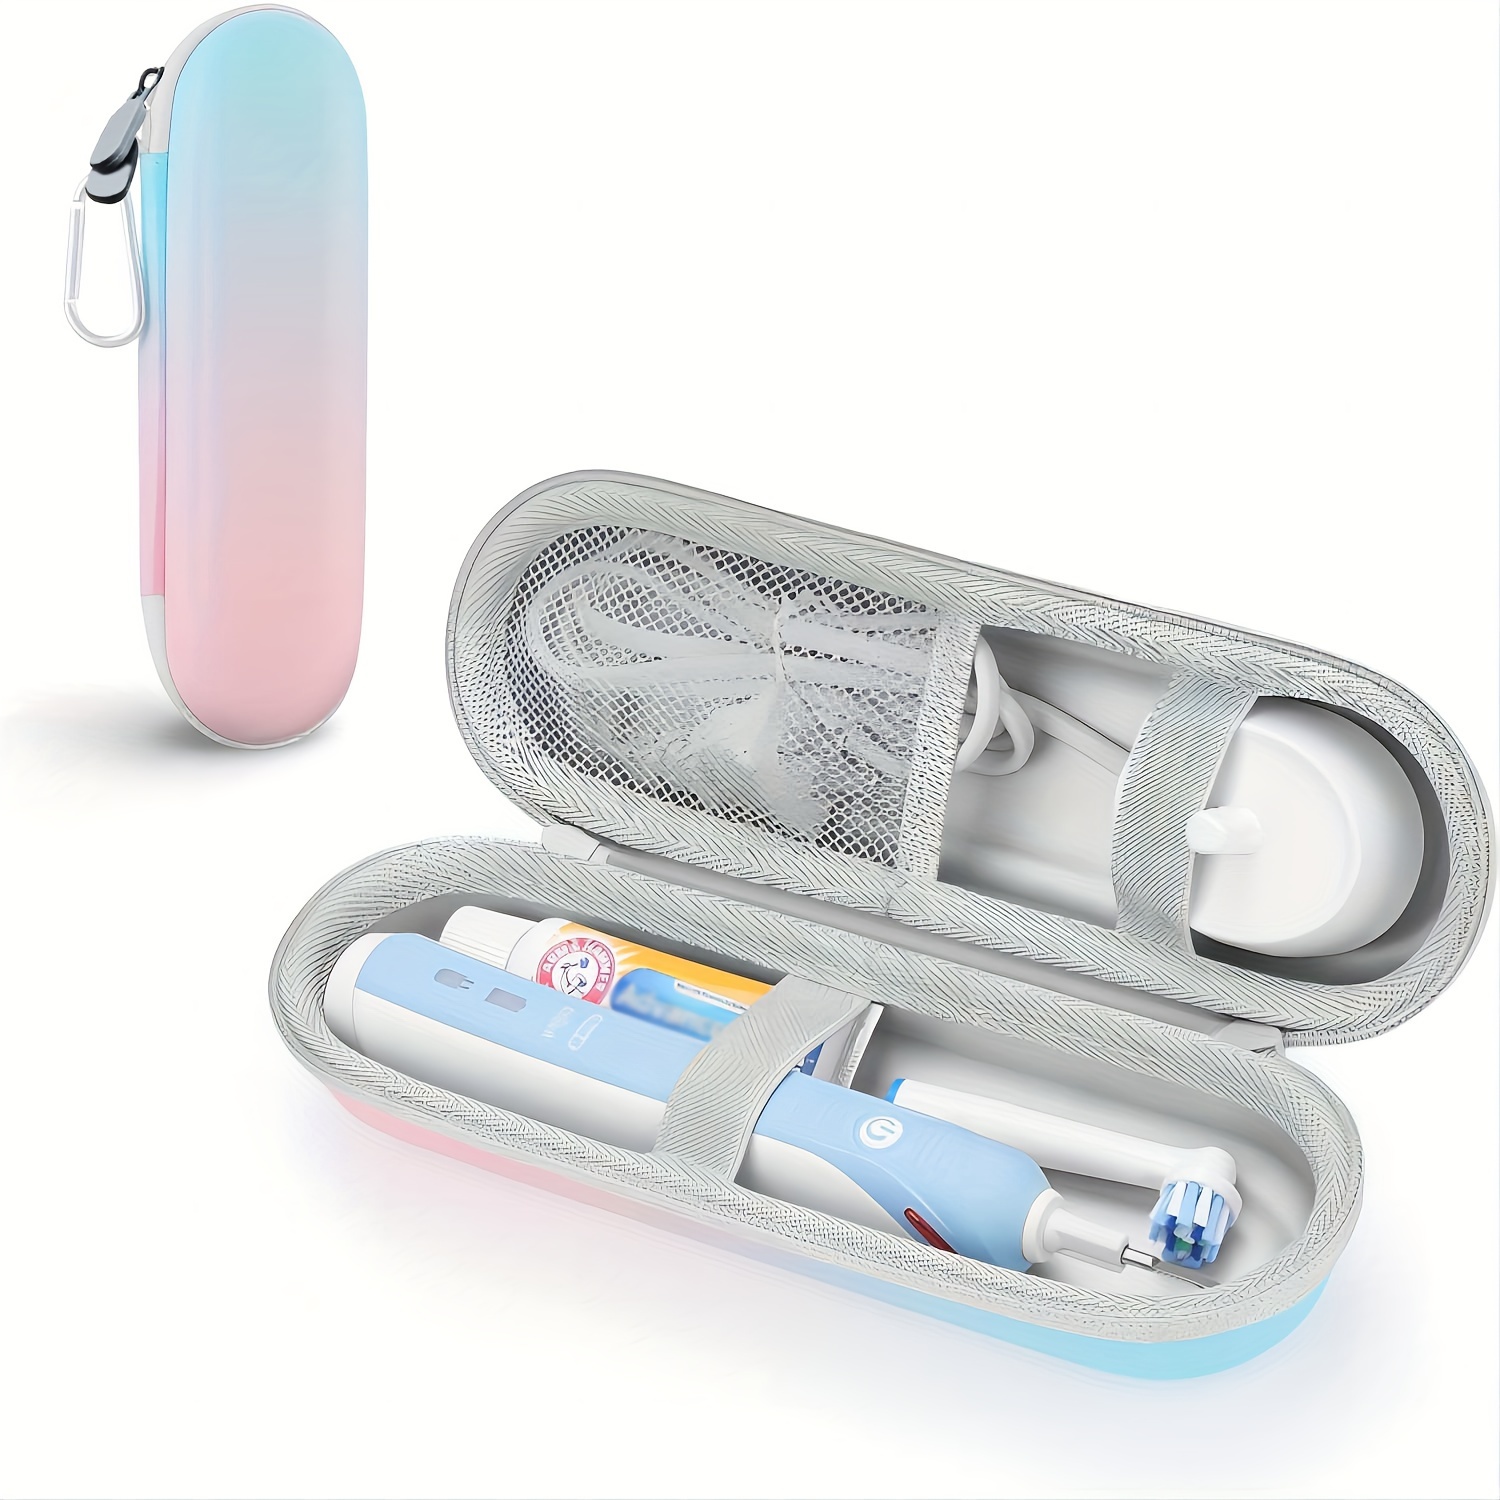 

Shockproof & Waterproof Electric Toothbrush Travel Case - Durable Eva Protective Cover With Large Storage, Fits All Models (case Only)